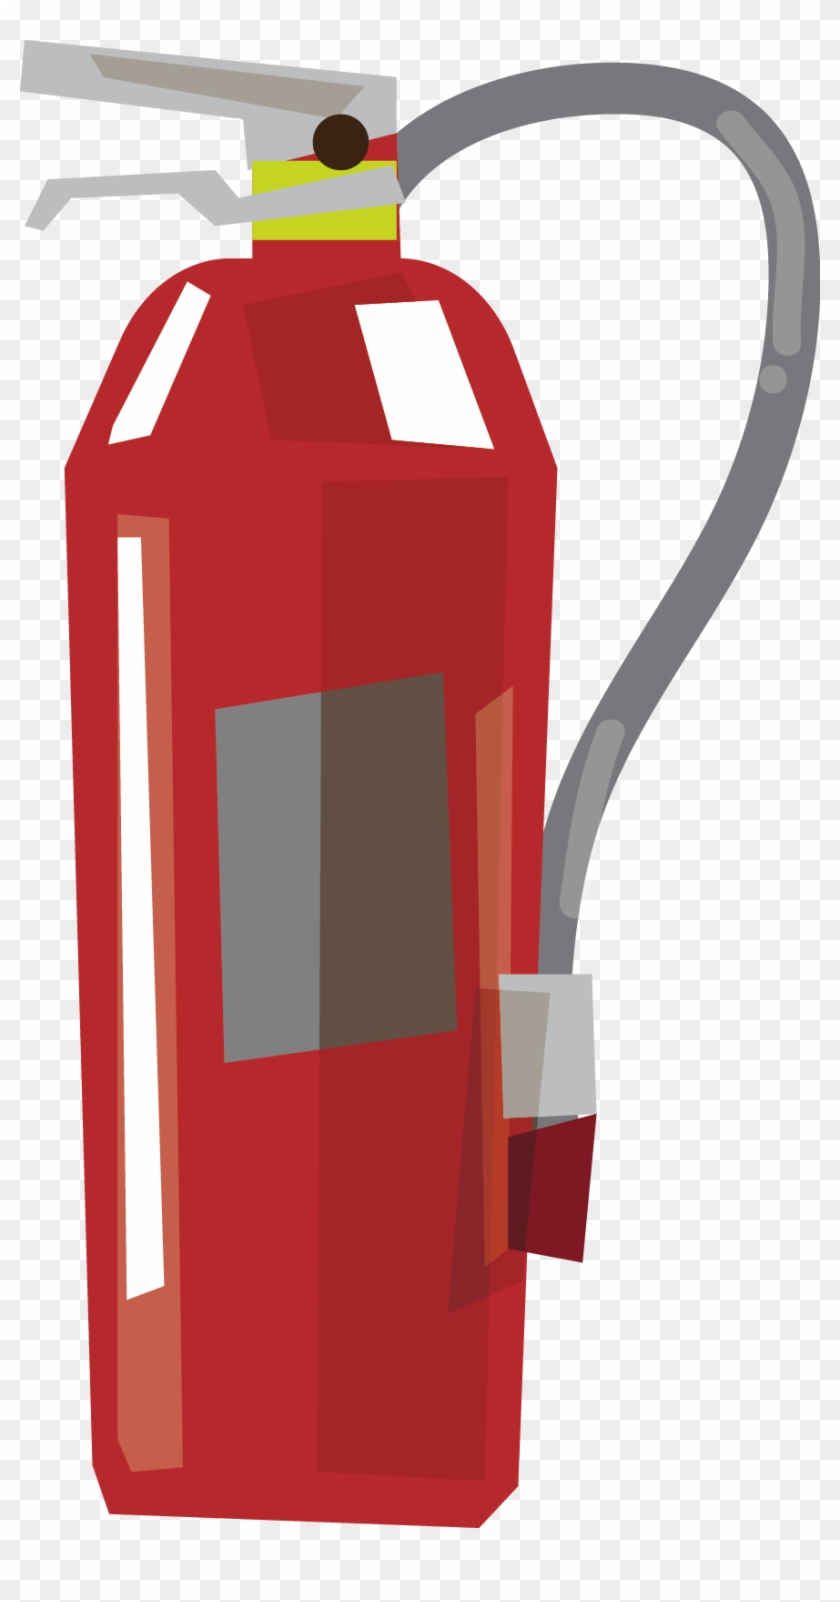 Fire Extinguisher Firefighting Material - Fire Extinguisher Firefighting Material #729560